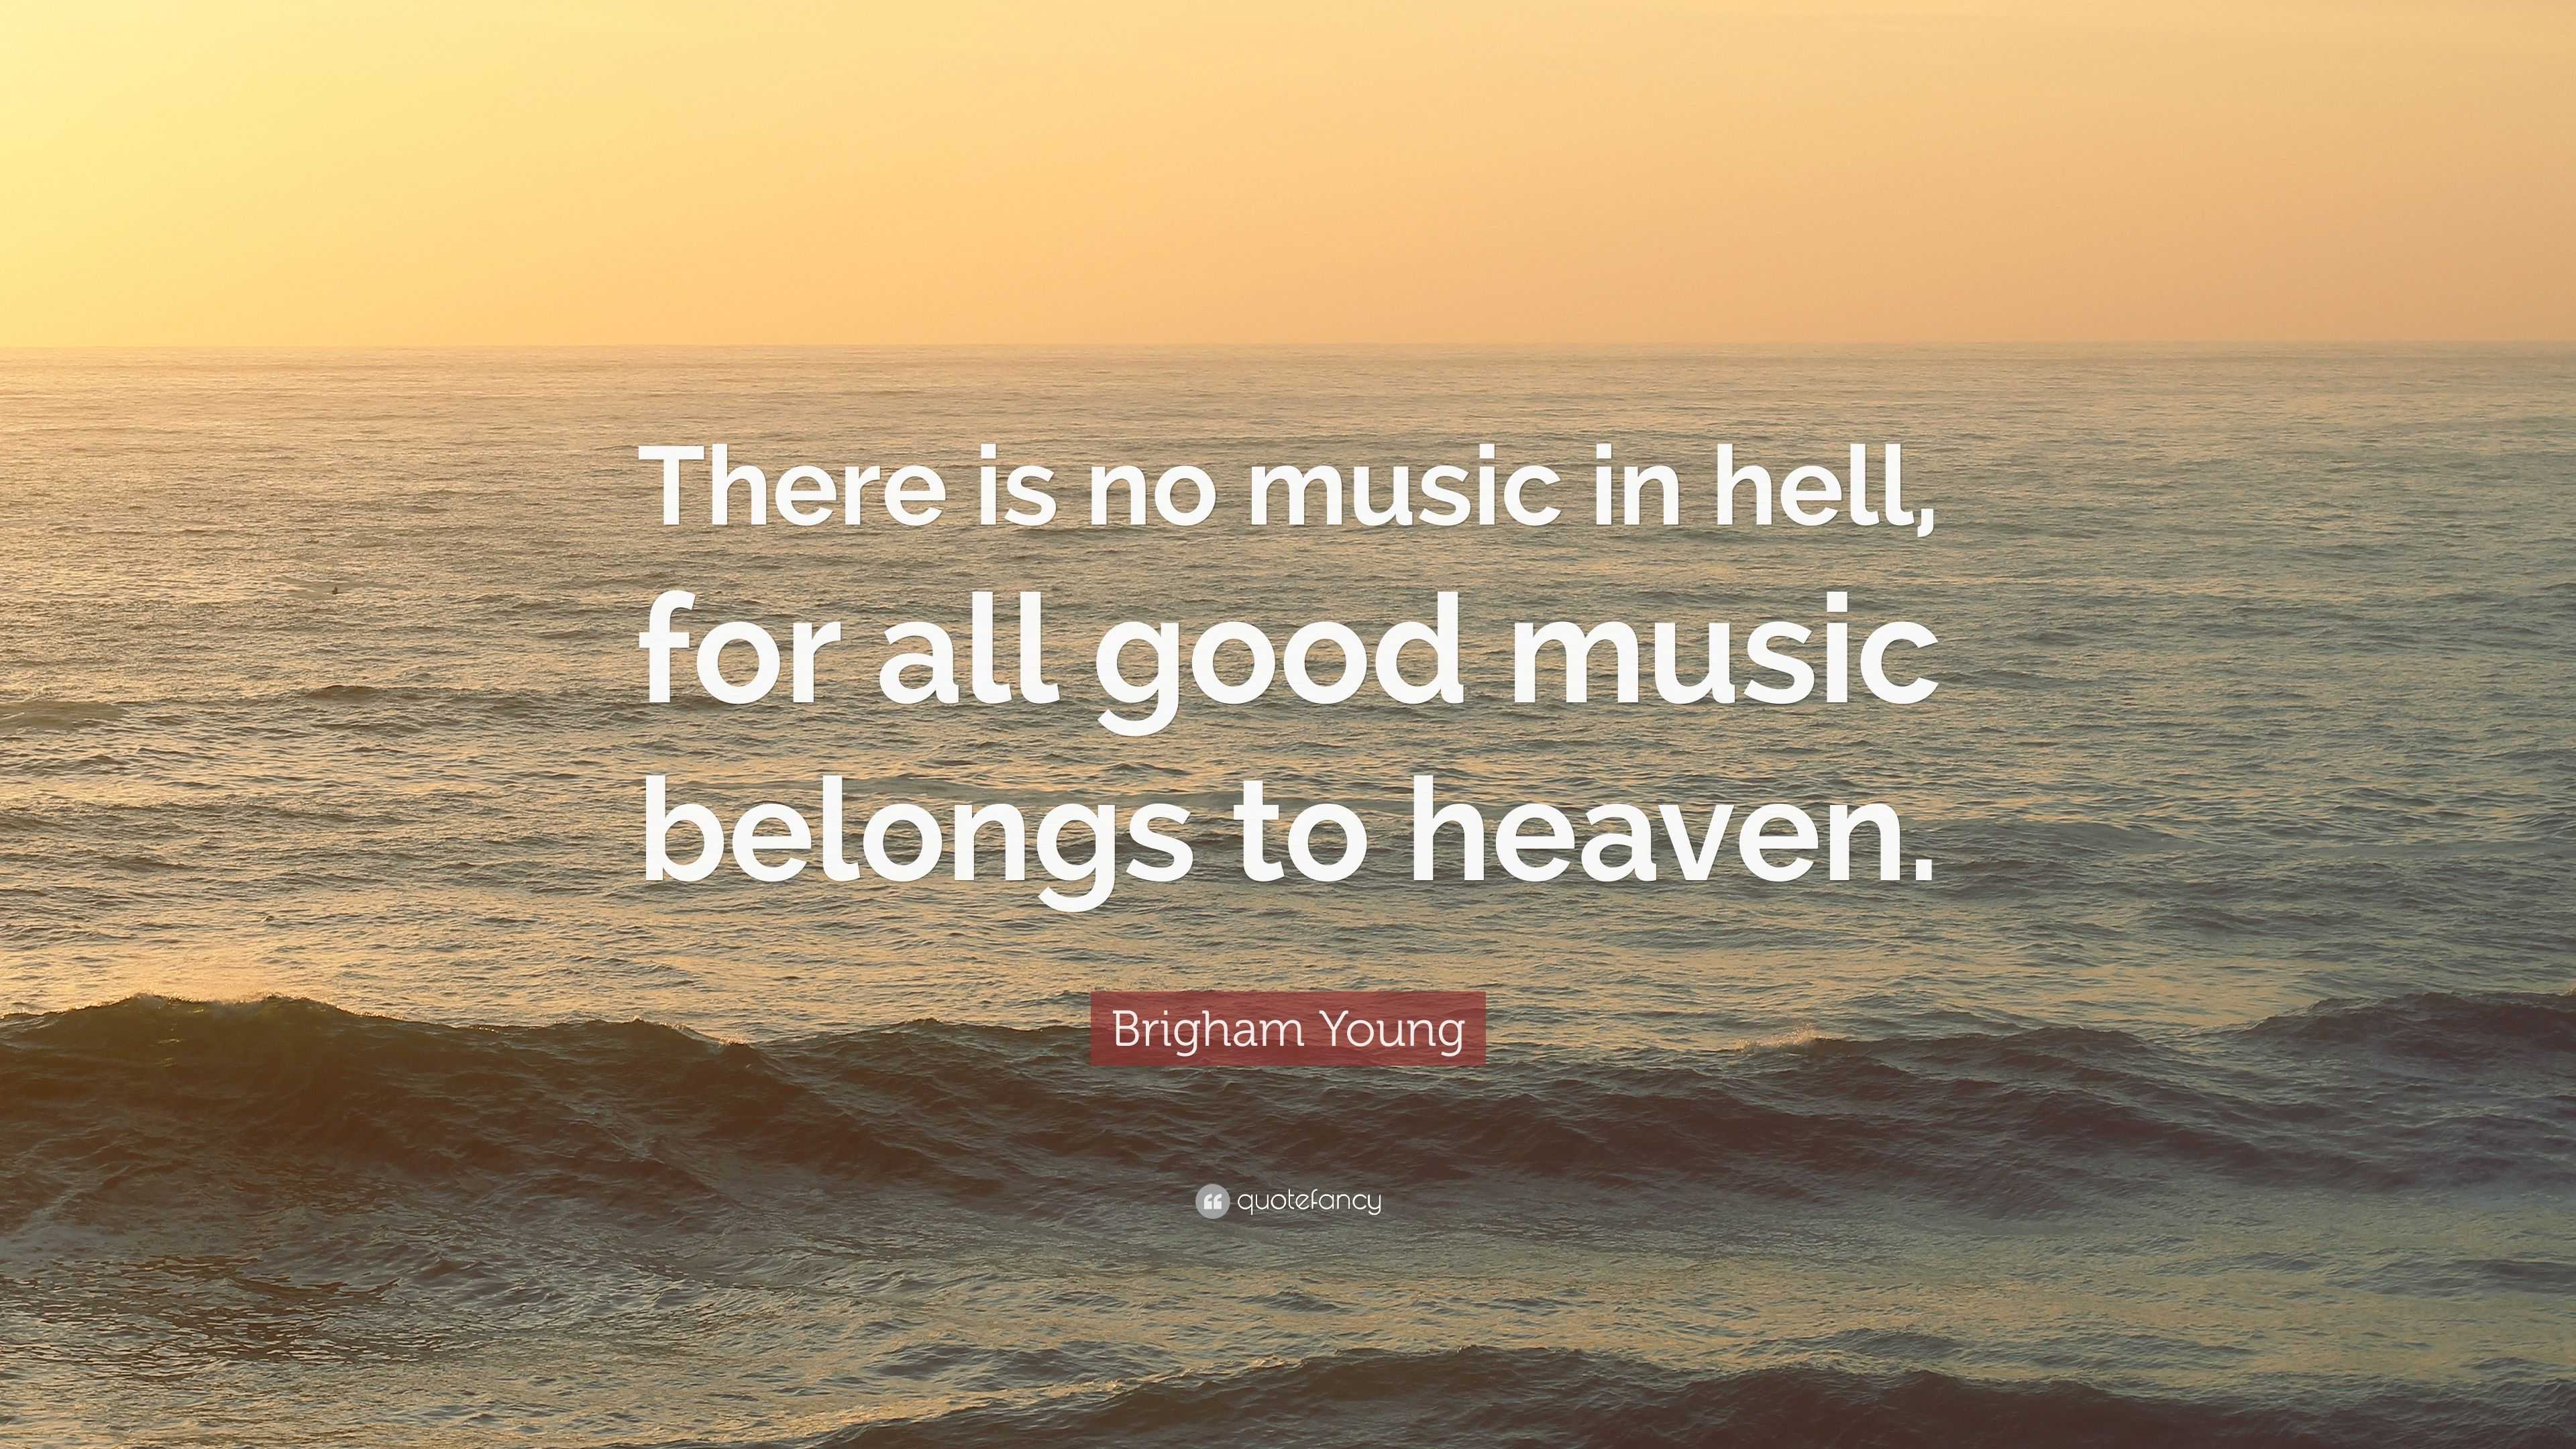 Brigham Young Quote  There is no music  in hell for all 